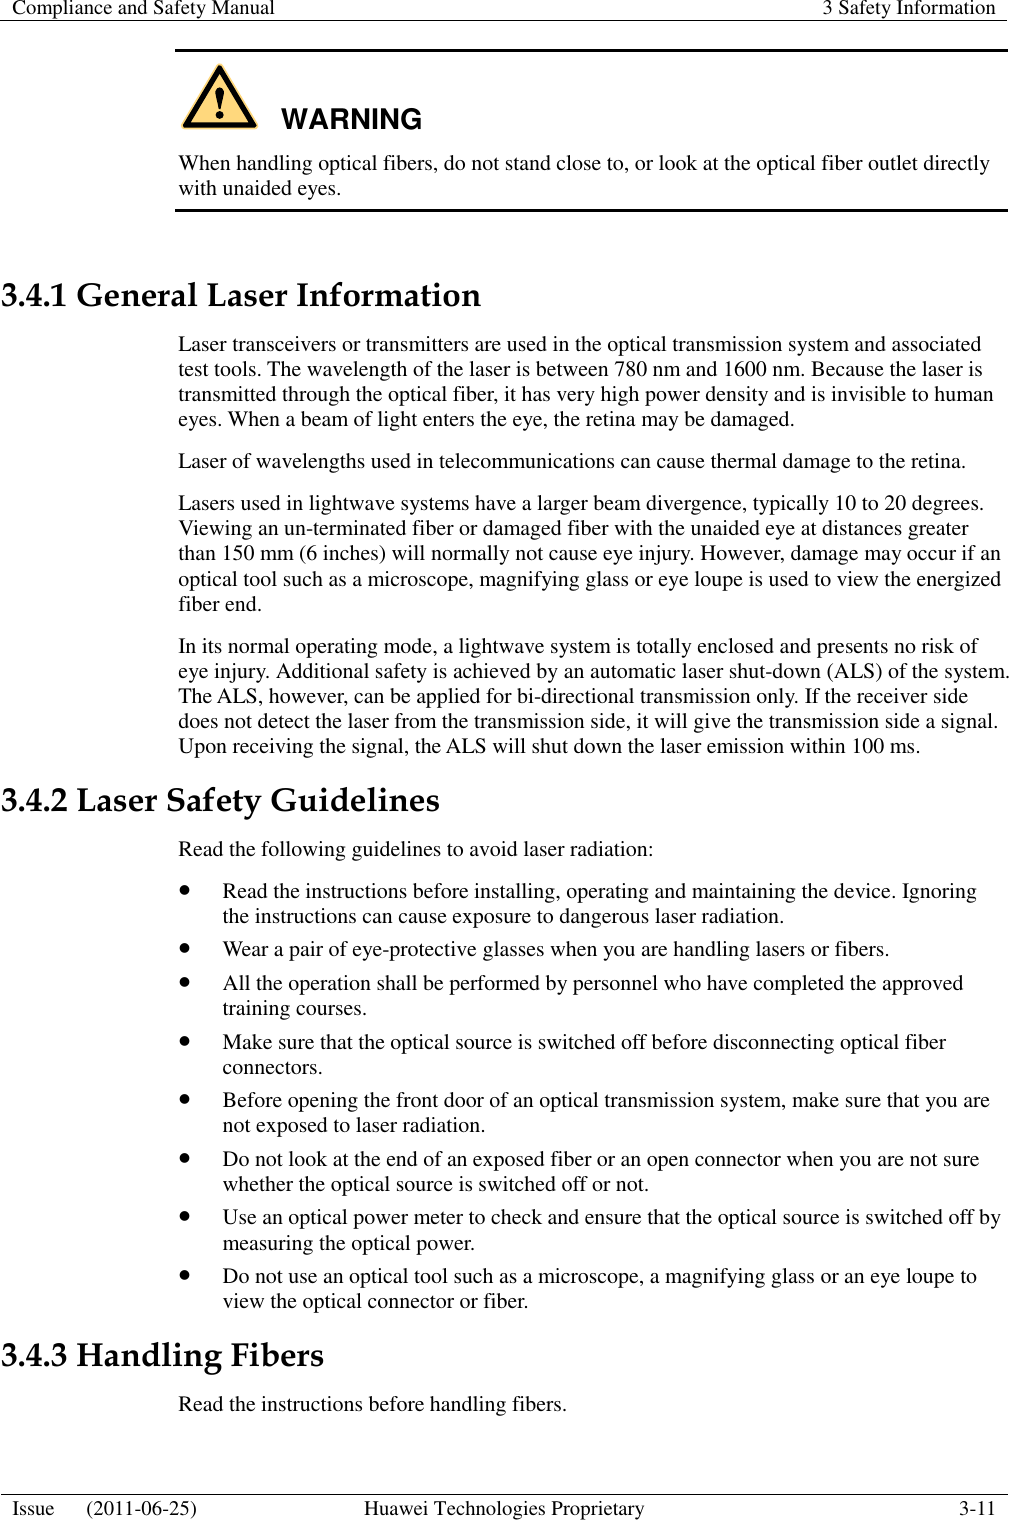 Compliance and Safety Manual 3 Safety Information  Issue      (2011-06-25) Huawei Technologies Proprietary 3-11  WARNING When handling optical fibers, do not stand close to, or look at the optical fiber outlet directly with unaided eyes.  3.4.1 General Laser Information Laser transceivers or transmitters are used in the optical transmission system and associated test tools. The wavelength of the laser is between 780 nm and 1600 nm. Because the laser is transmitted through the optical fiber, it has very high power density and is invisible to human eyes. When a beam of light enters the eye, the retina may be damaged. Laser of wavelengths used in telecommunications can cause thermal damage to the retina. Lasers used in lightwave systems have a larger beam divergence, typically 10 to 20 degrees. Viewing an un-terminated fiber or damaged fiber with the unaided eye at distances greater than 150 mm (6 inches) will normally not cause eye injury. However, damage may occur if an optical tool such as a microscope, magnifying glass or eye loupe is used to view the energized fiber end. In its normal operating mode, a lightwave system is totally enclosed and presents no risk of eye injury. Additional safety is achieved by an automatic laser shut-down (ALS) of the system. The ALS, however, can be applied for bi-directional transmission only. If the receiver side does not detect the laser from the transmission side, it will give the transmission side a signal. Upon receiving the signal, the ALS will shut down the laser emission within 100 ms. 3.4.2 Laser Safety Guidelines Read the following guidelines to avoid laser radiation:  Read the instructions before installing, operating and maintaining the device. Ignoring the instructions can cause exposure to dangerous laser radiation.  Wear a pair of eye-protective glasses when you are handling lasers or fibers.  All the operation shall be performed by personnel who have completed the approved training courses.  Make sure that the optical source is switched off before disconnecting optical fiber connectors.  Before opening the front door of an optical transmission system, make sure that you are not exposed to laser radiation.  Do not look at the end of an exposed fiber or an open connector when you are not sure whether the optical source is switched off or not.  Use an optical power meter to check and ensure that the optical source is switched off by measuring the optical power.  Do not use an optical tool such as a microscope, a magnifying glass or an eye loupe to view the optical connector or fiber. 3.4.3 Handling Fibers Read the instructions before handling fibers. 